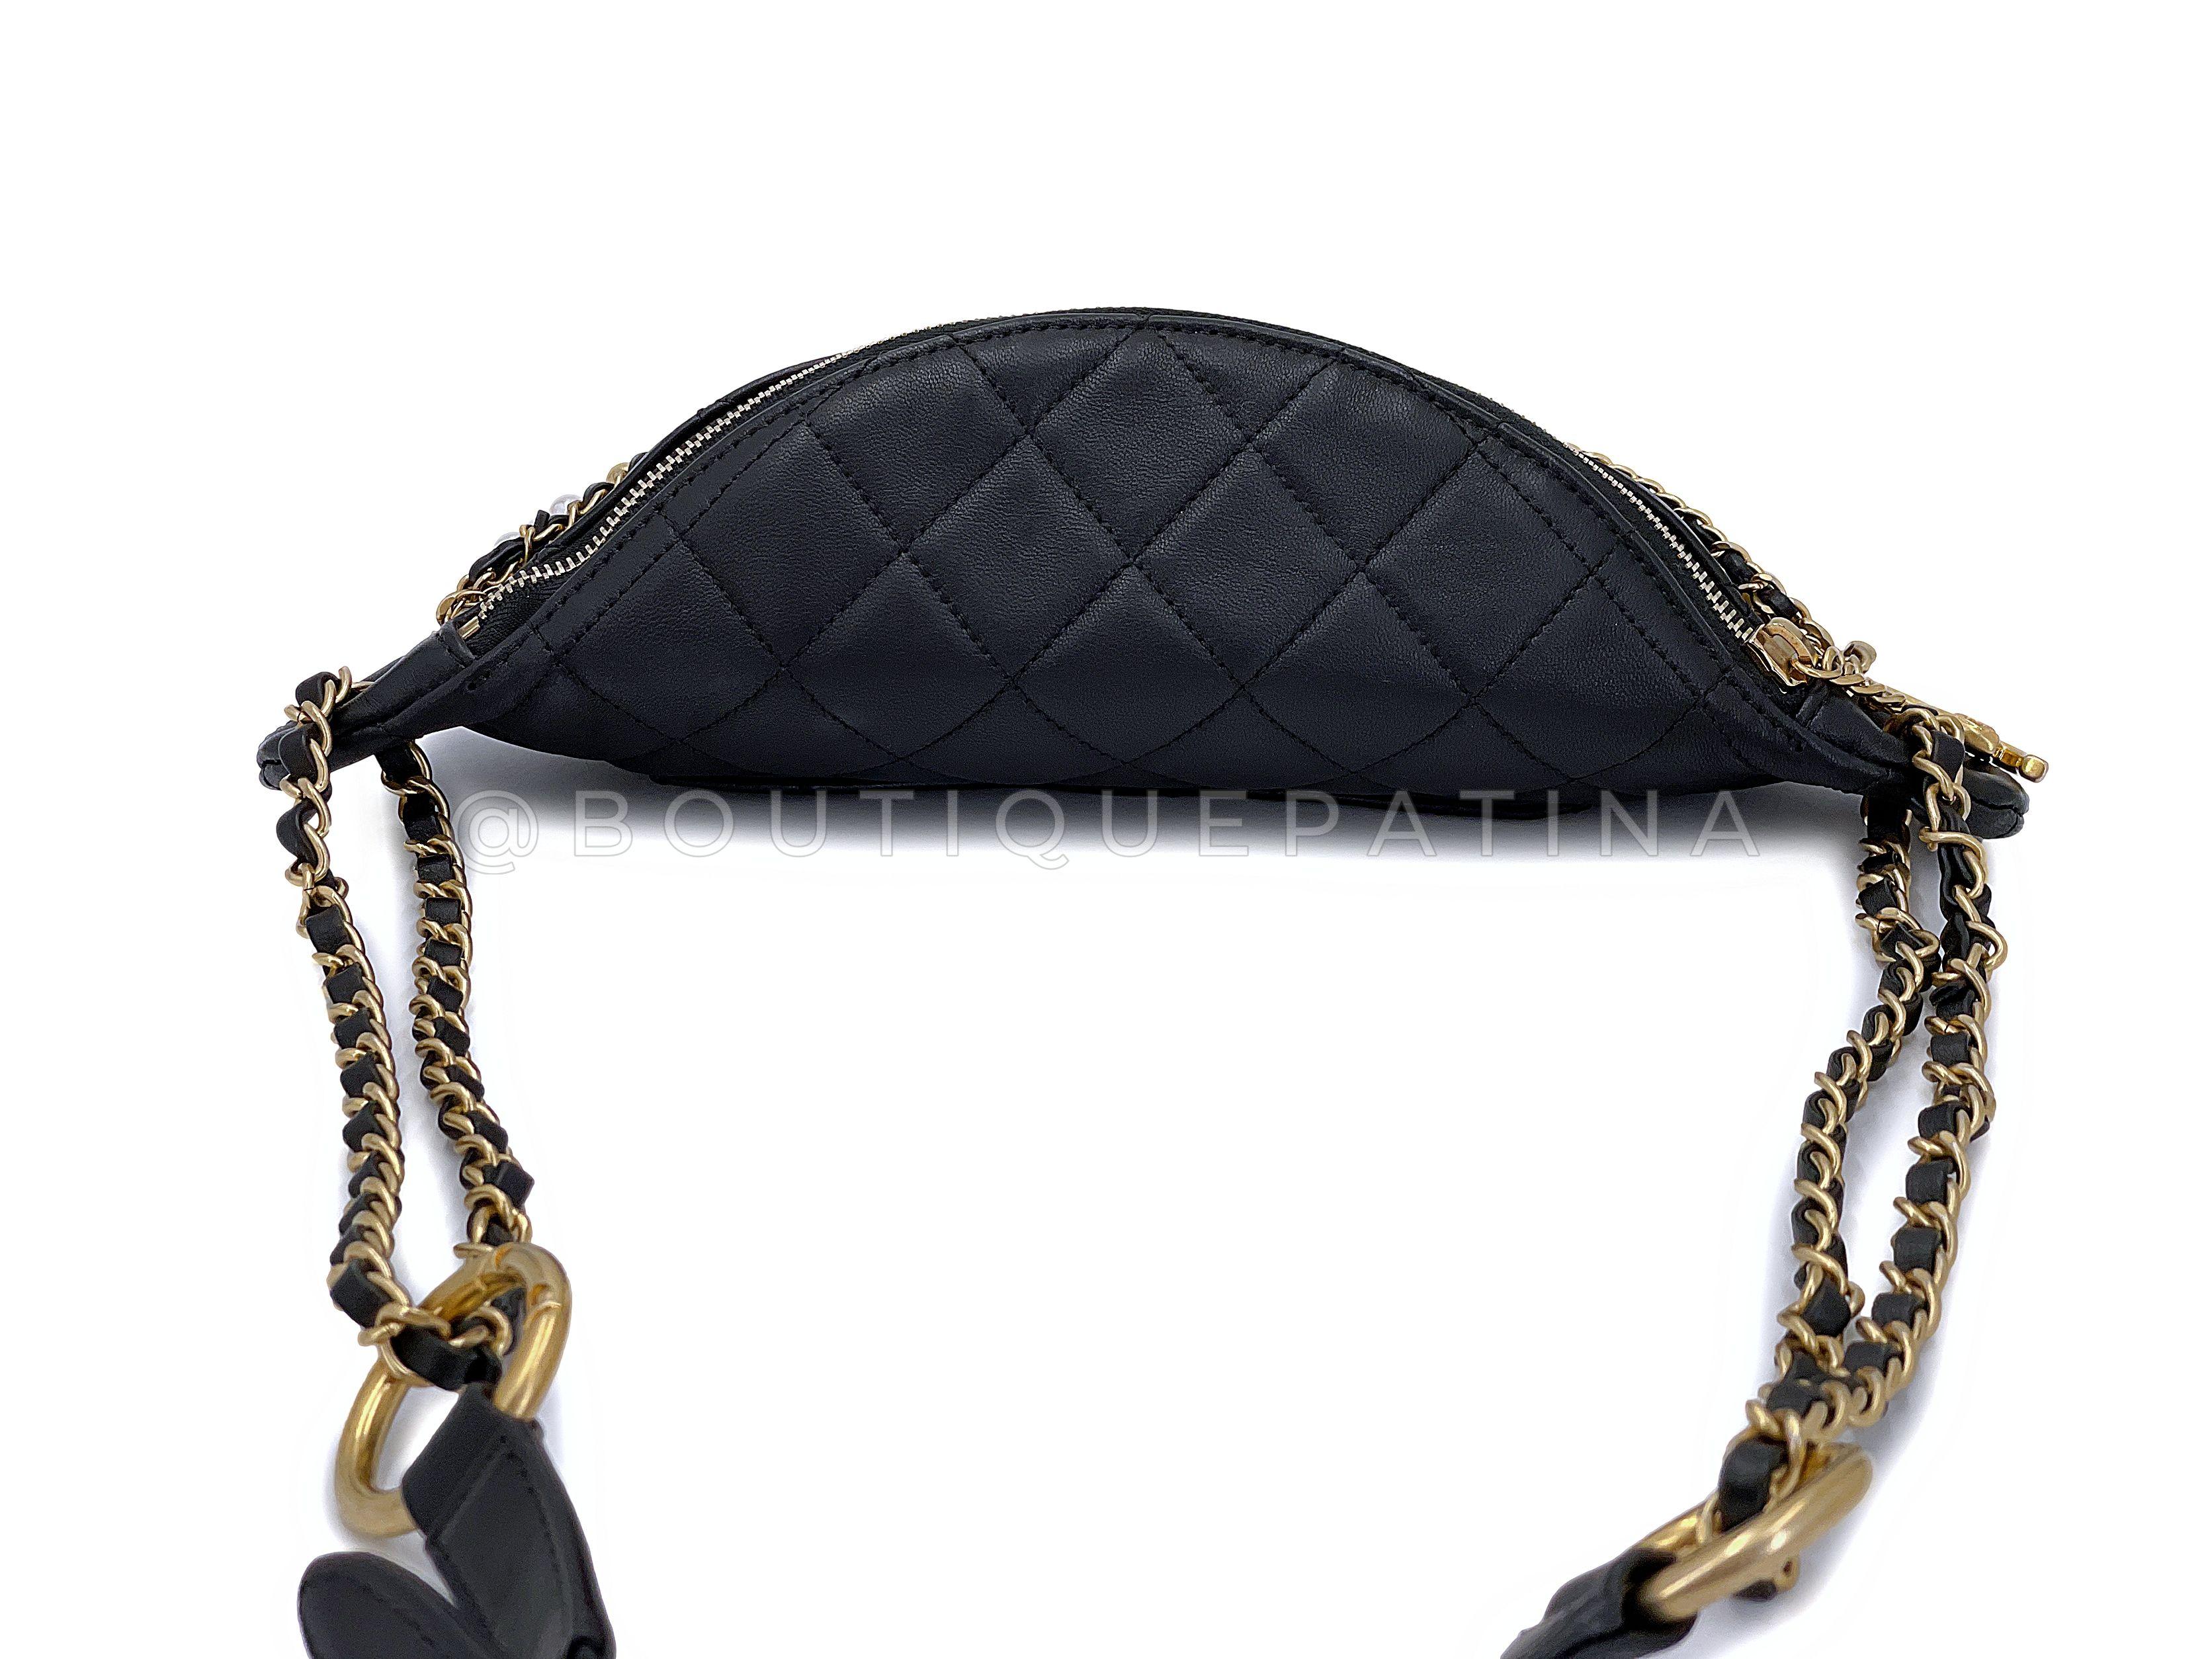 Chanel 19A Black All About Chains Pearl Sac Fanny Pack GHW 67686 en vente 1